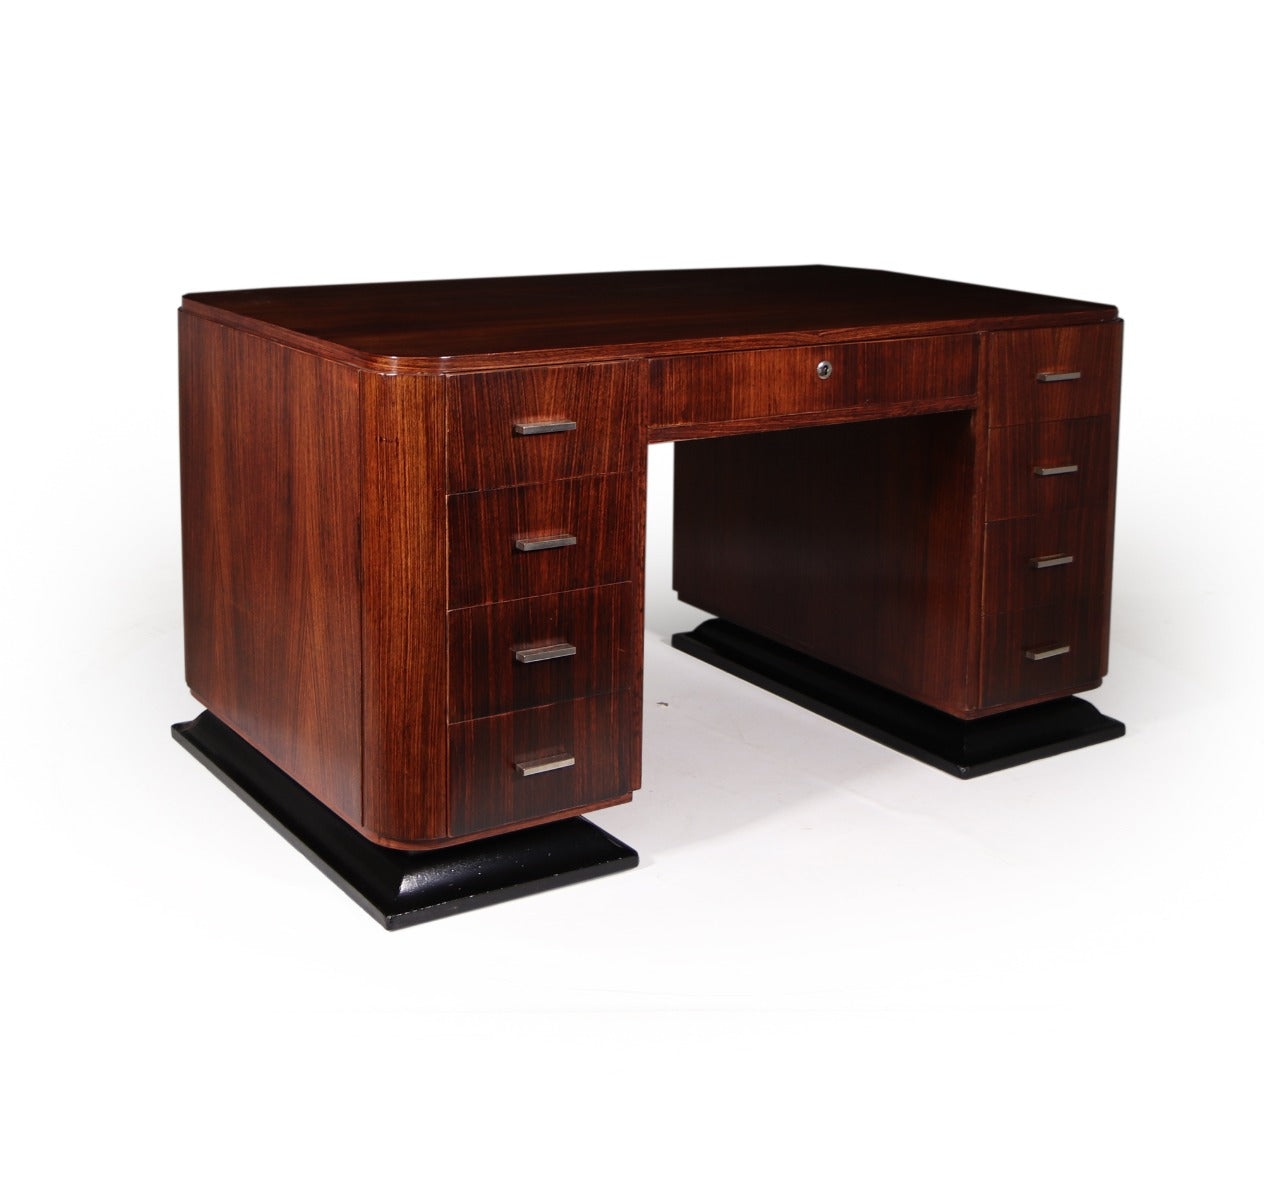 French art Deco Original Rosewood Desk – The Furniture Rooms